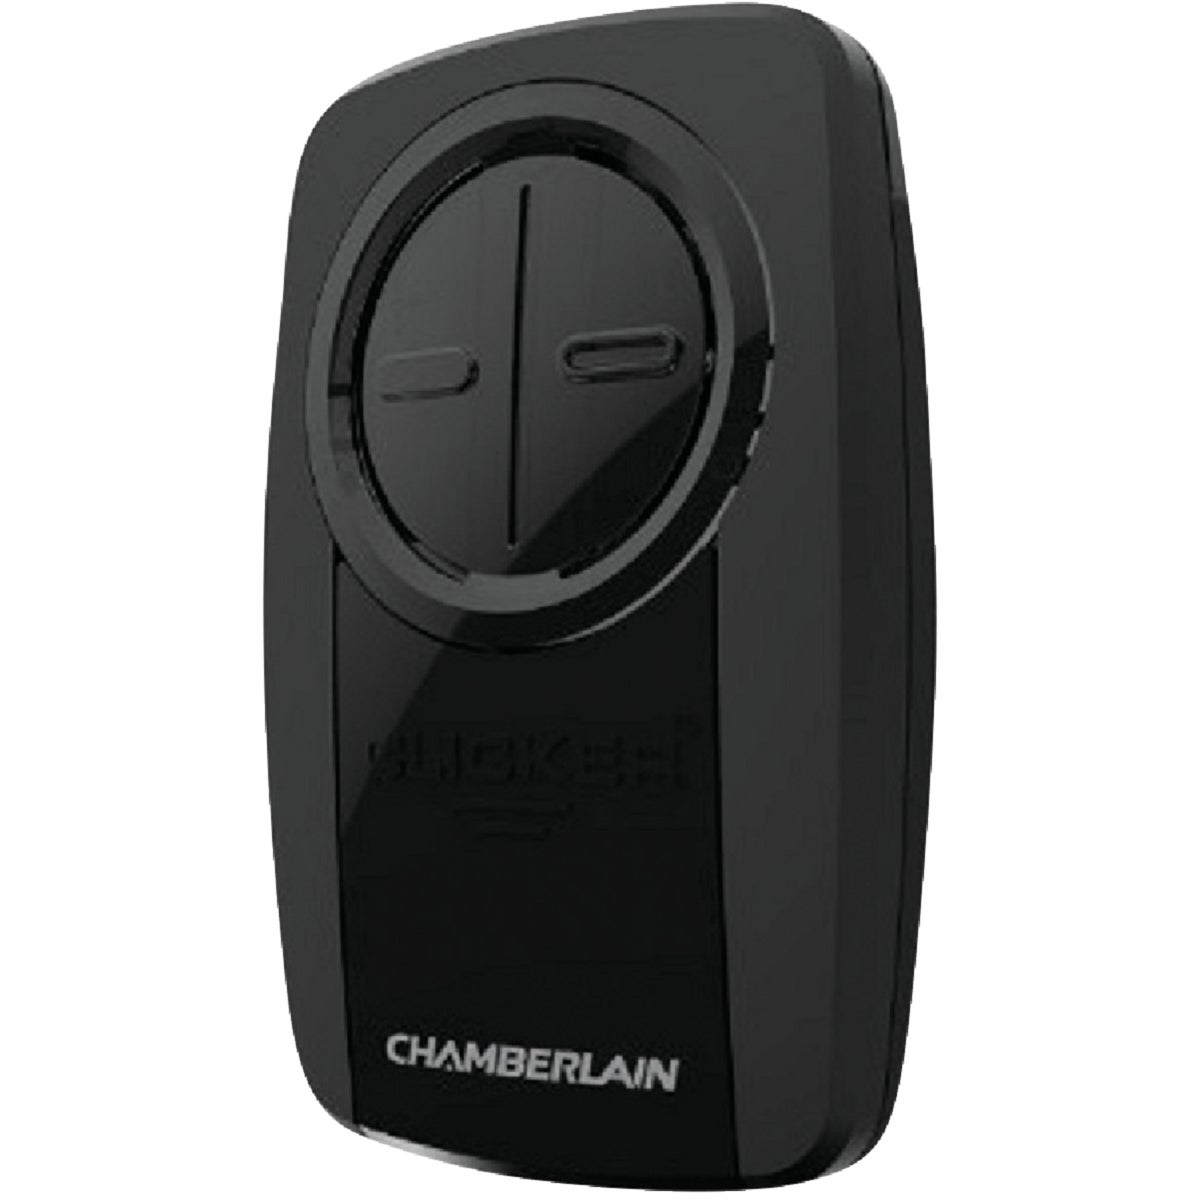 Item 104590, The Original Clicker Universal Garage Door Remote keeps you moving with two